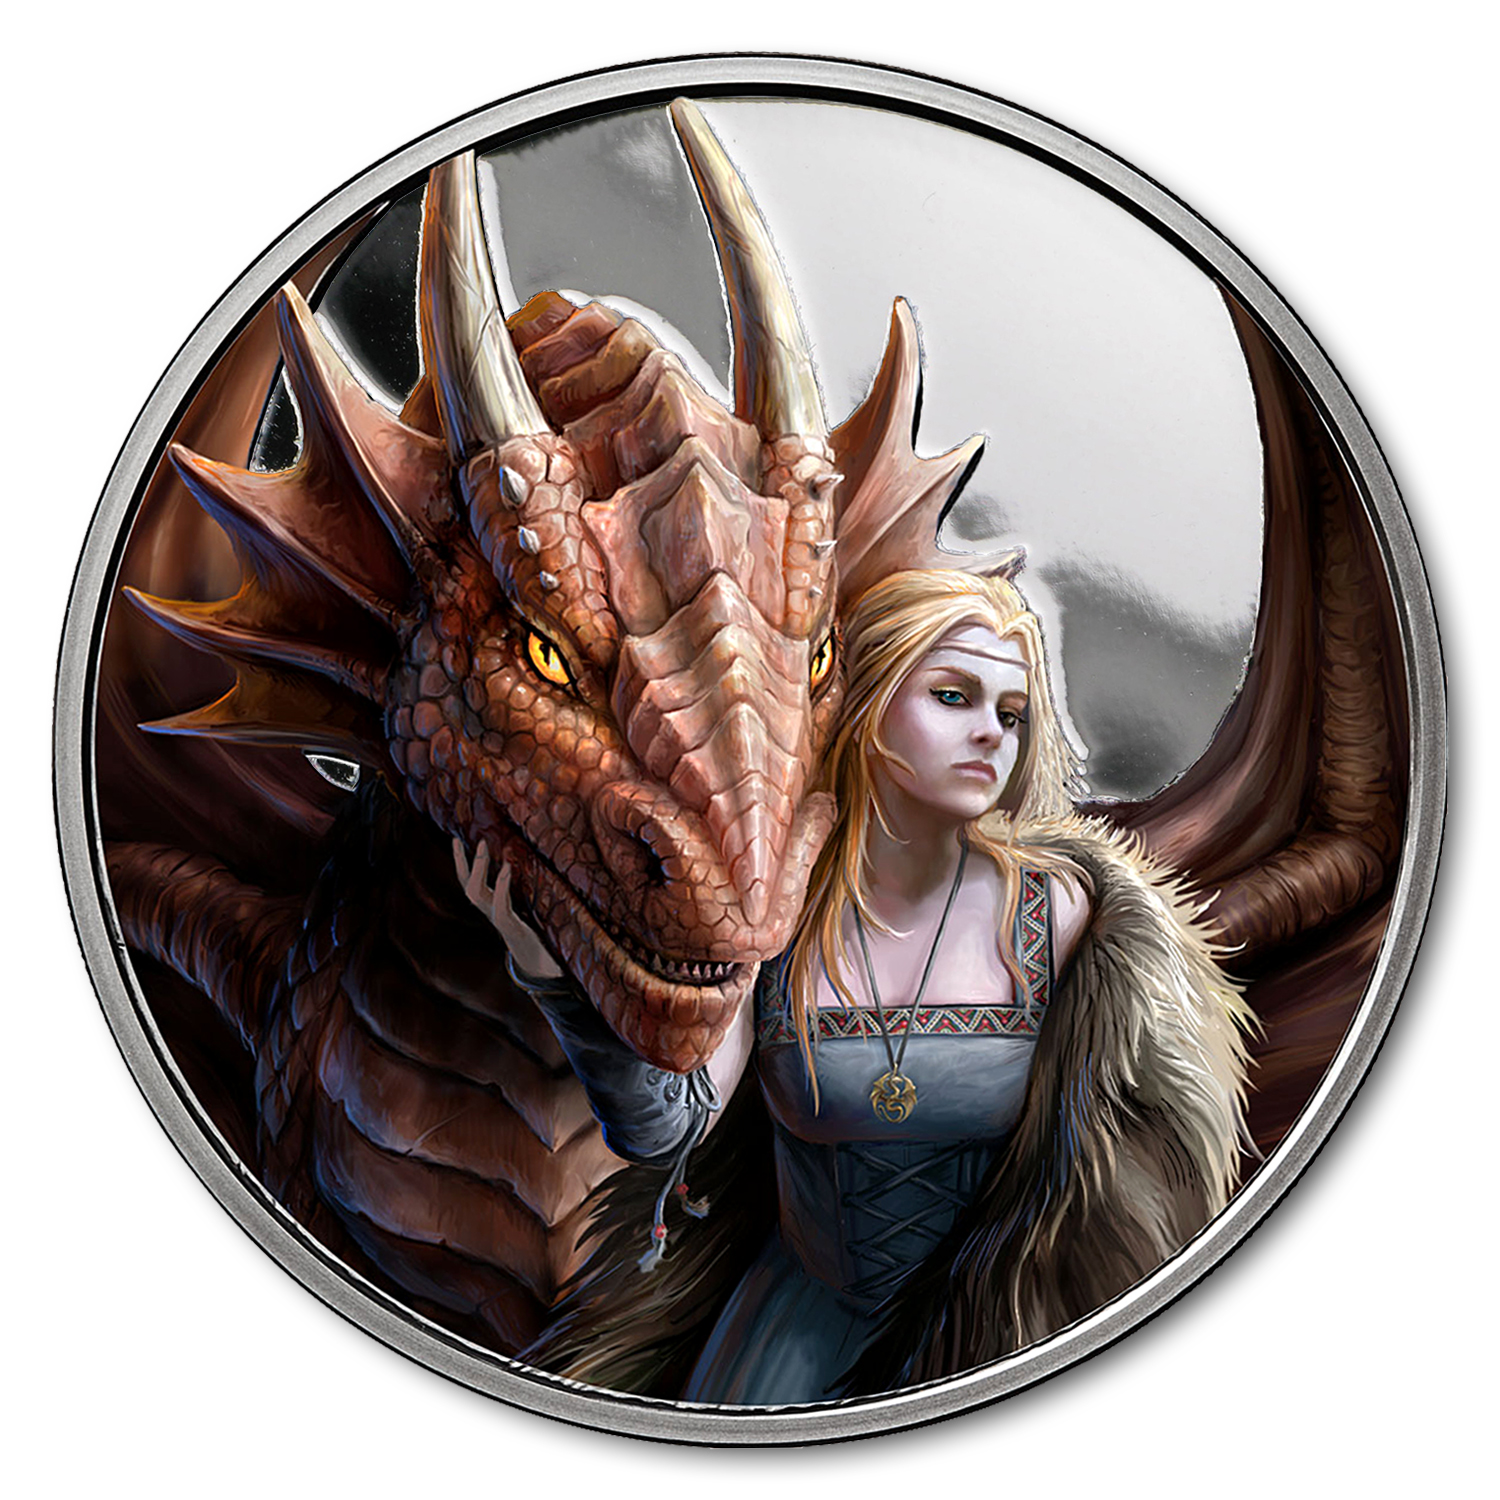 Friend or Foe 1 oz Silver Colorized Round Anne Stokes Dragons SKU#169632